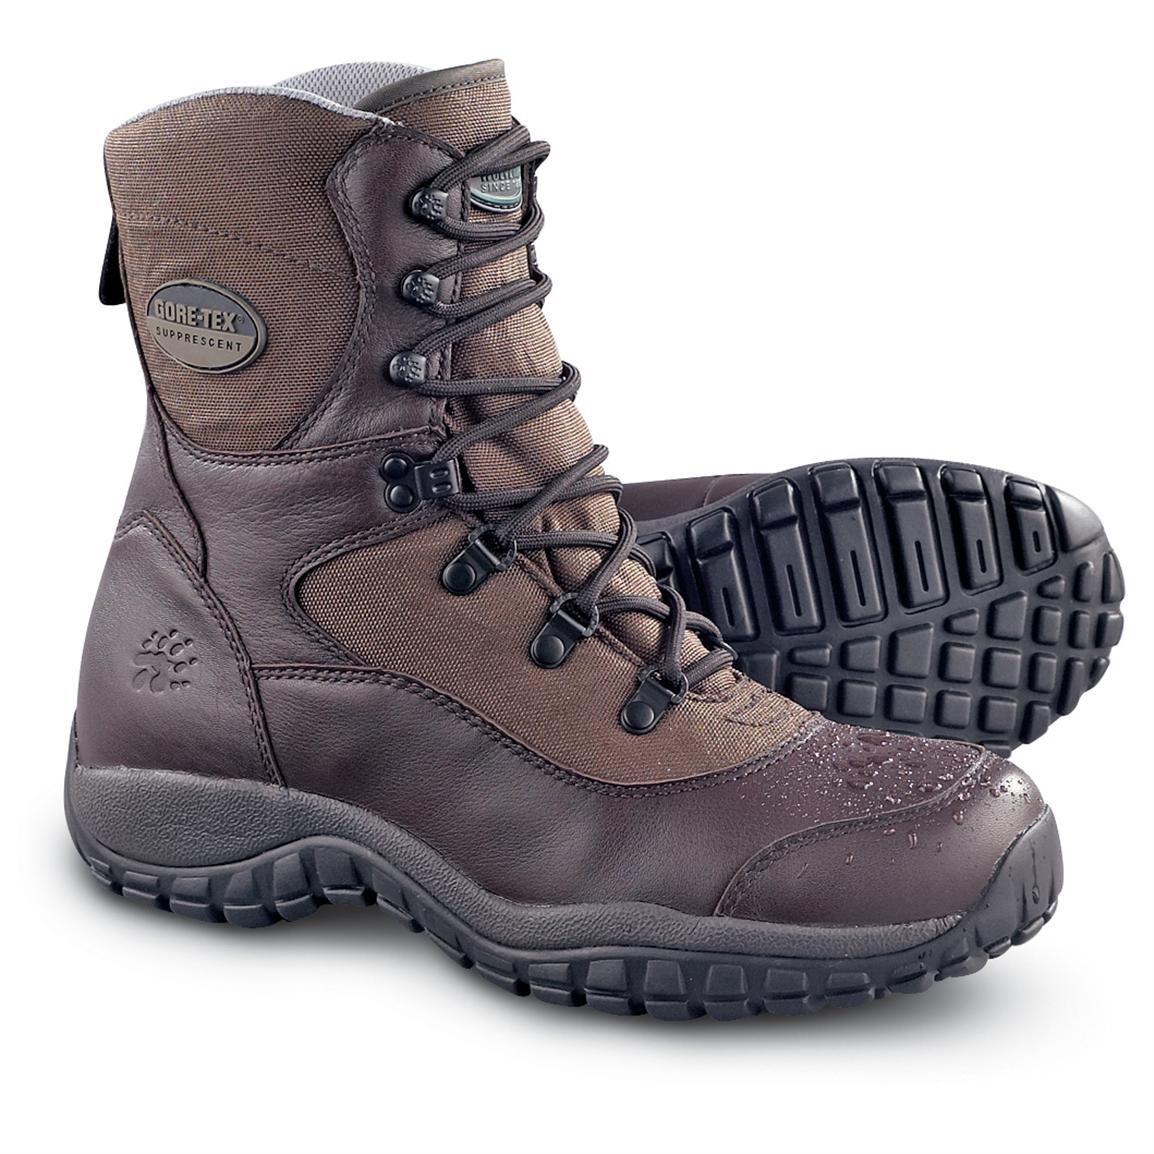 Men's Wolverine® GORE-TEX® Antelope Boots, Brown - 105900, Hunting ...